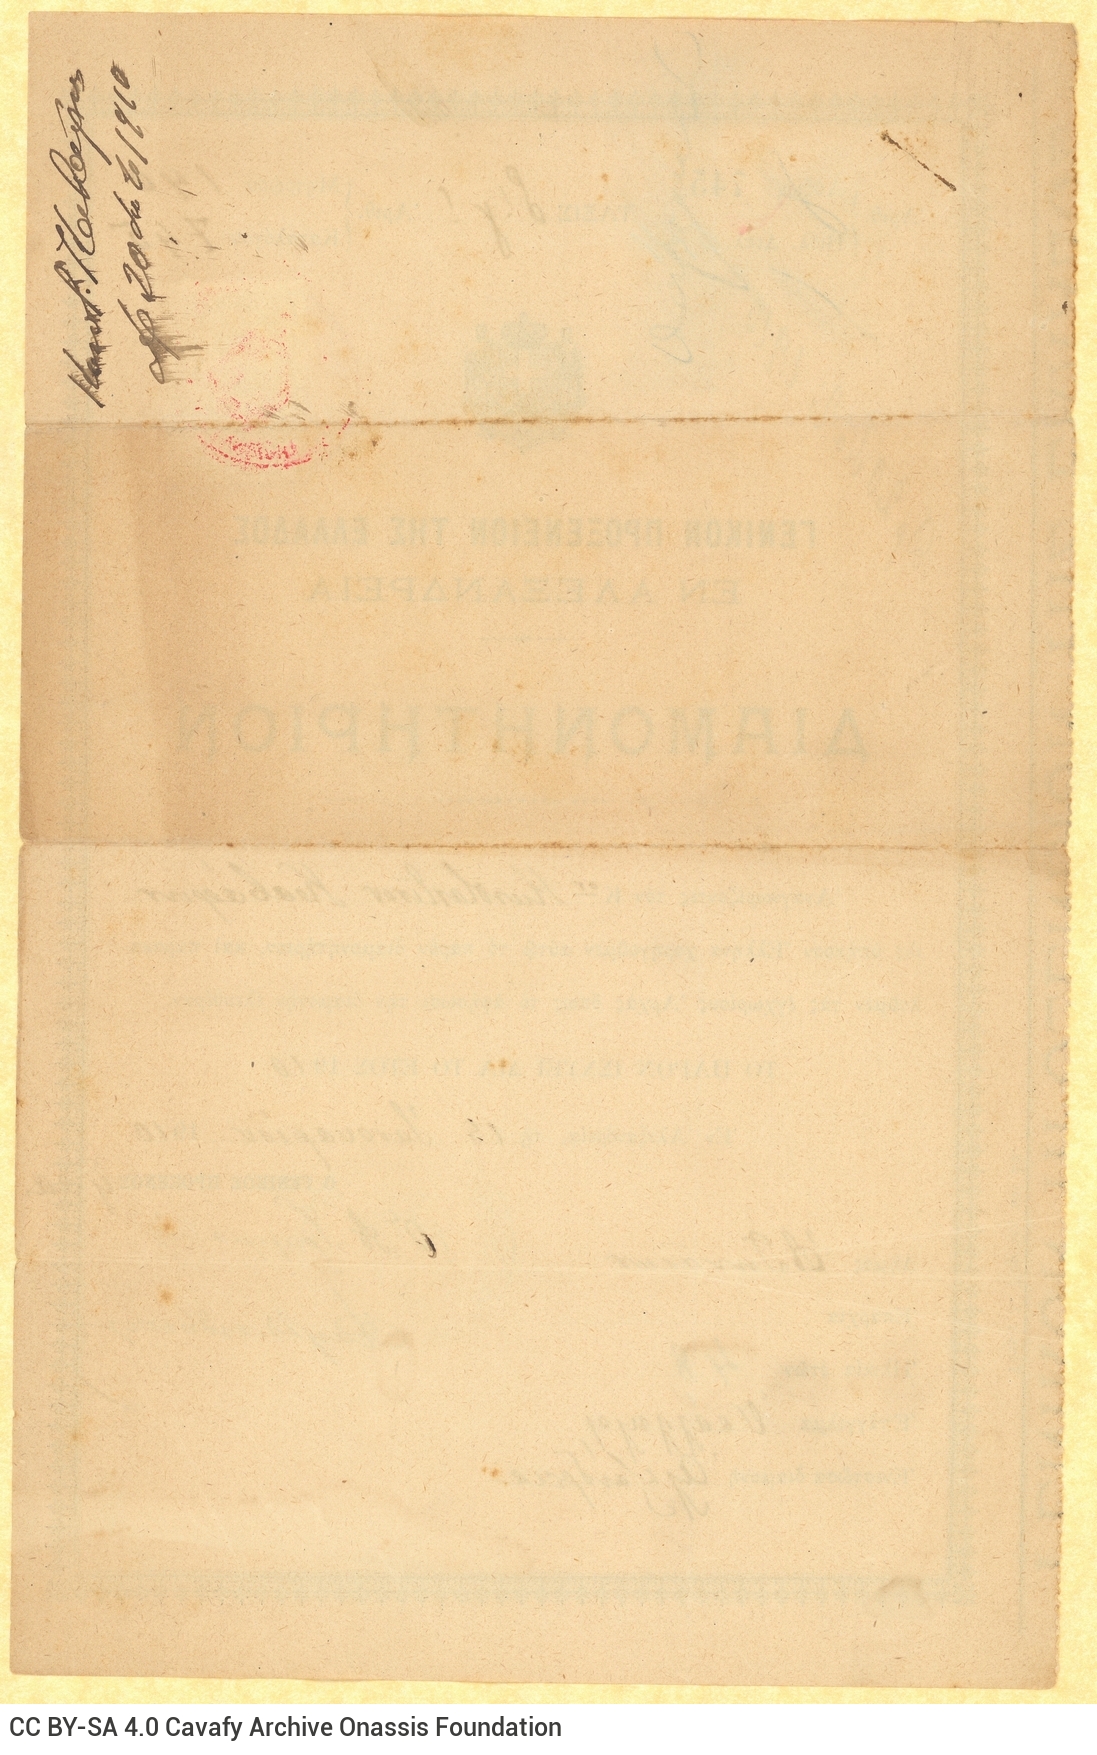 Printed permit of stay for Cavafy, issued by the Consulate General of Greece in Alexandria, valid for one year. Accompanie